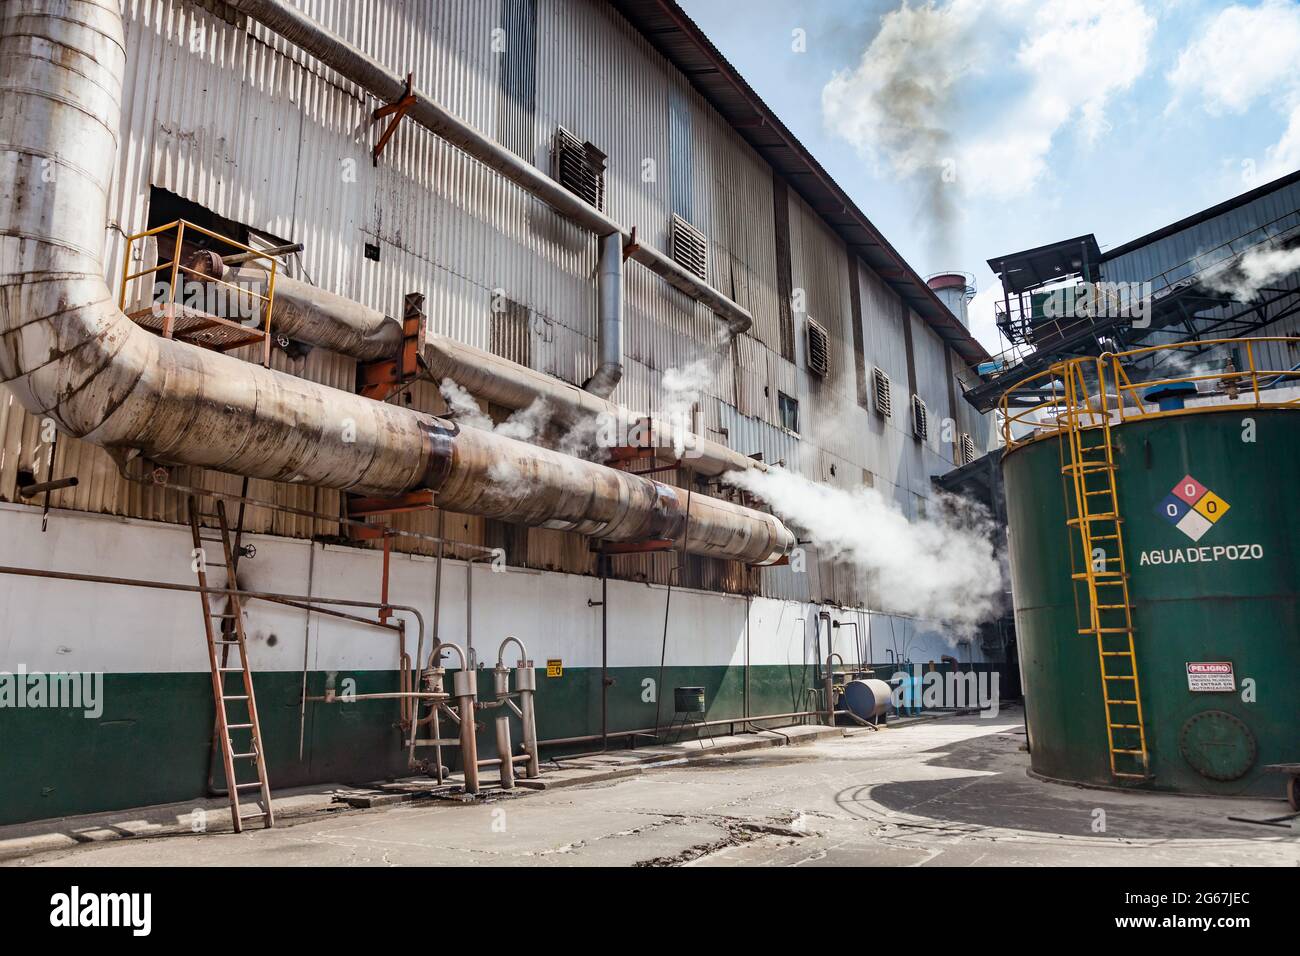 External view of a sugar refinery with vapour escaping vents Stock Photo